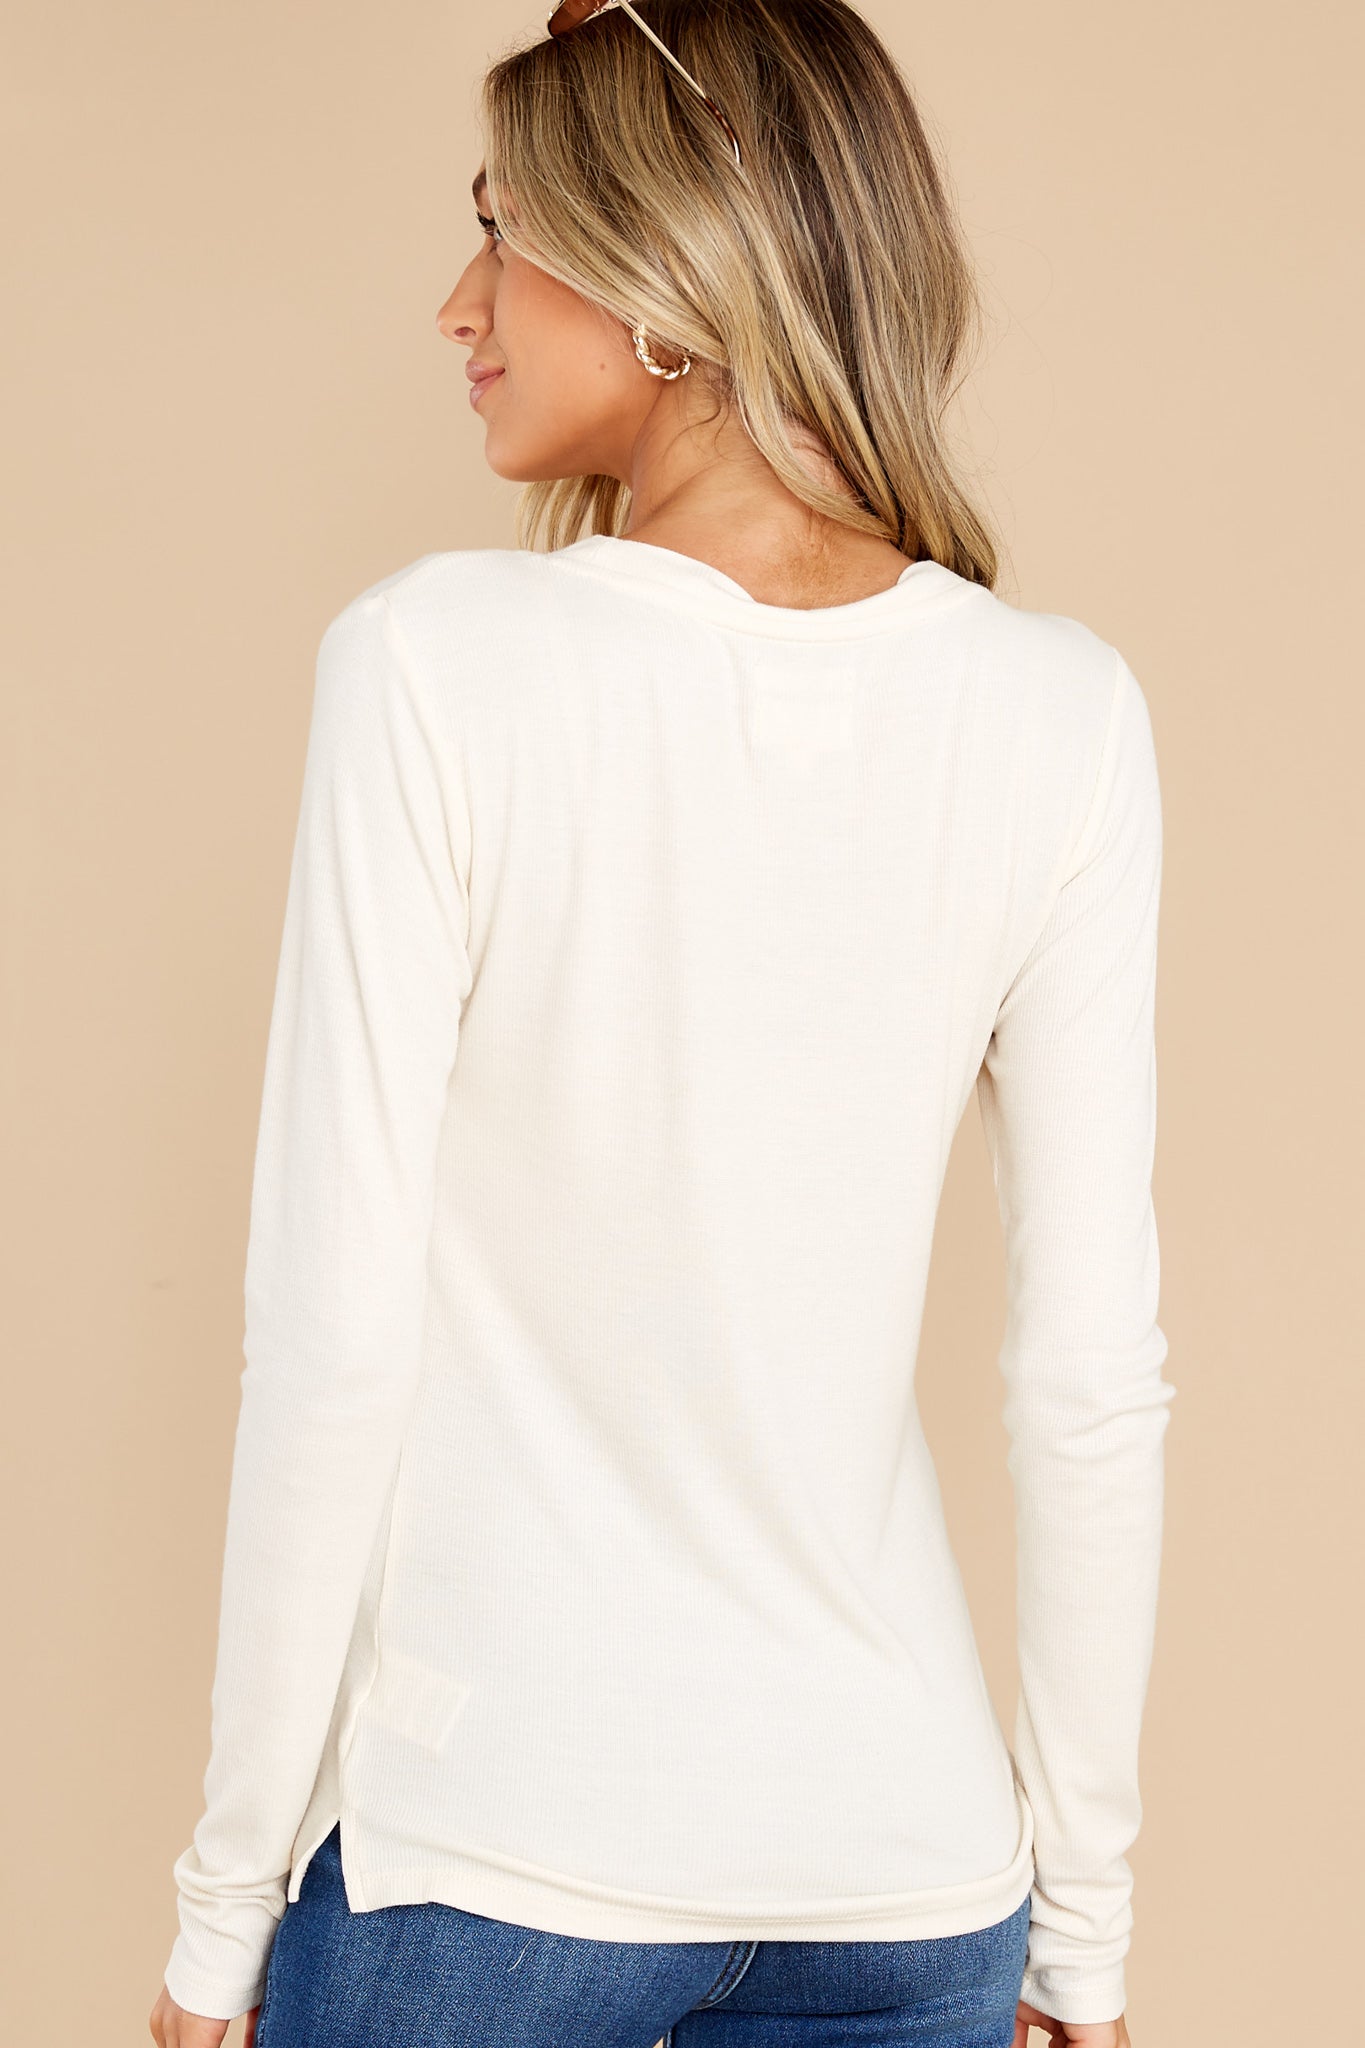 Back view of this top that features a relaxed fit with a v-neckline, long sleeves, and buttons down the bust area.